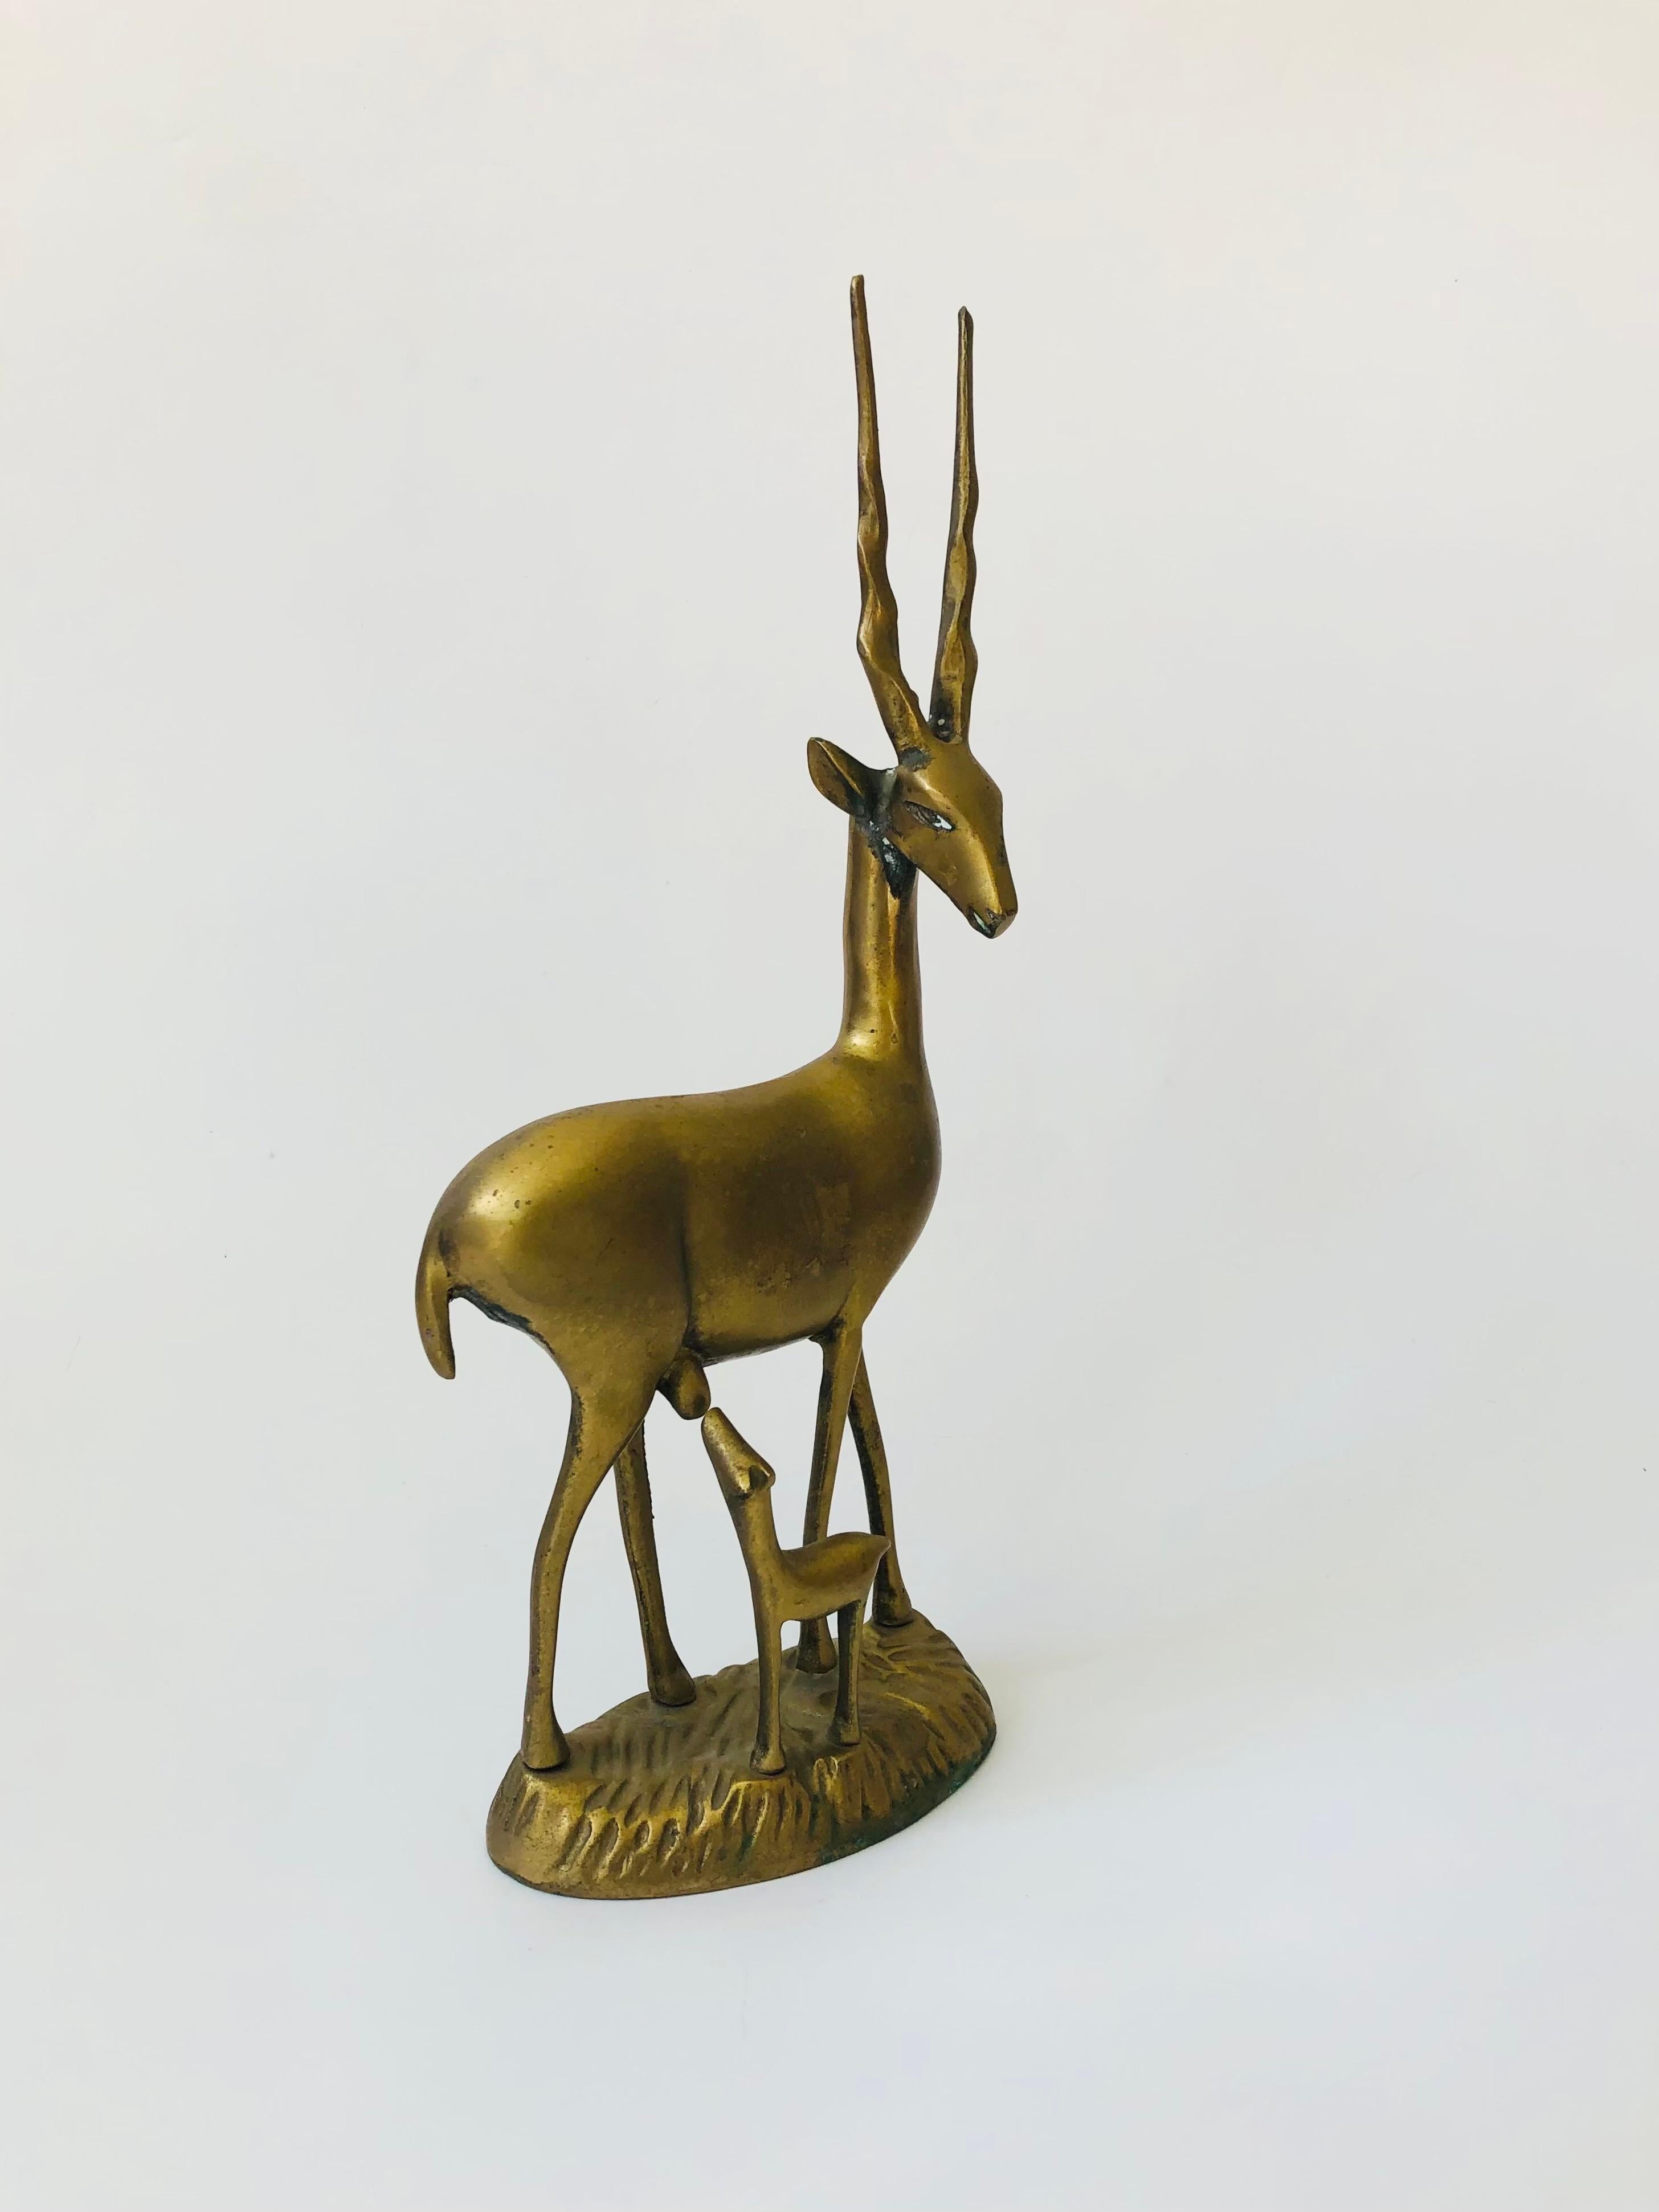 A large vintage brass gazelle with its baby. Beautiful gold patina and details formed into the brass.


